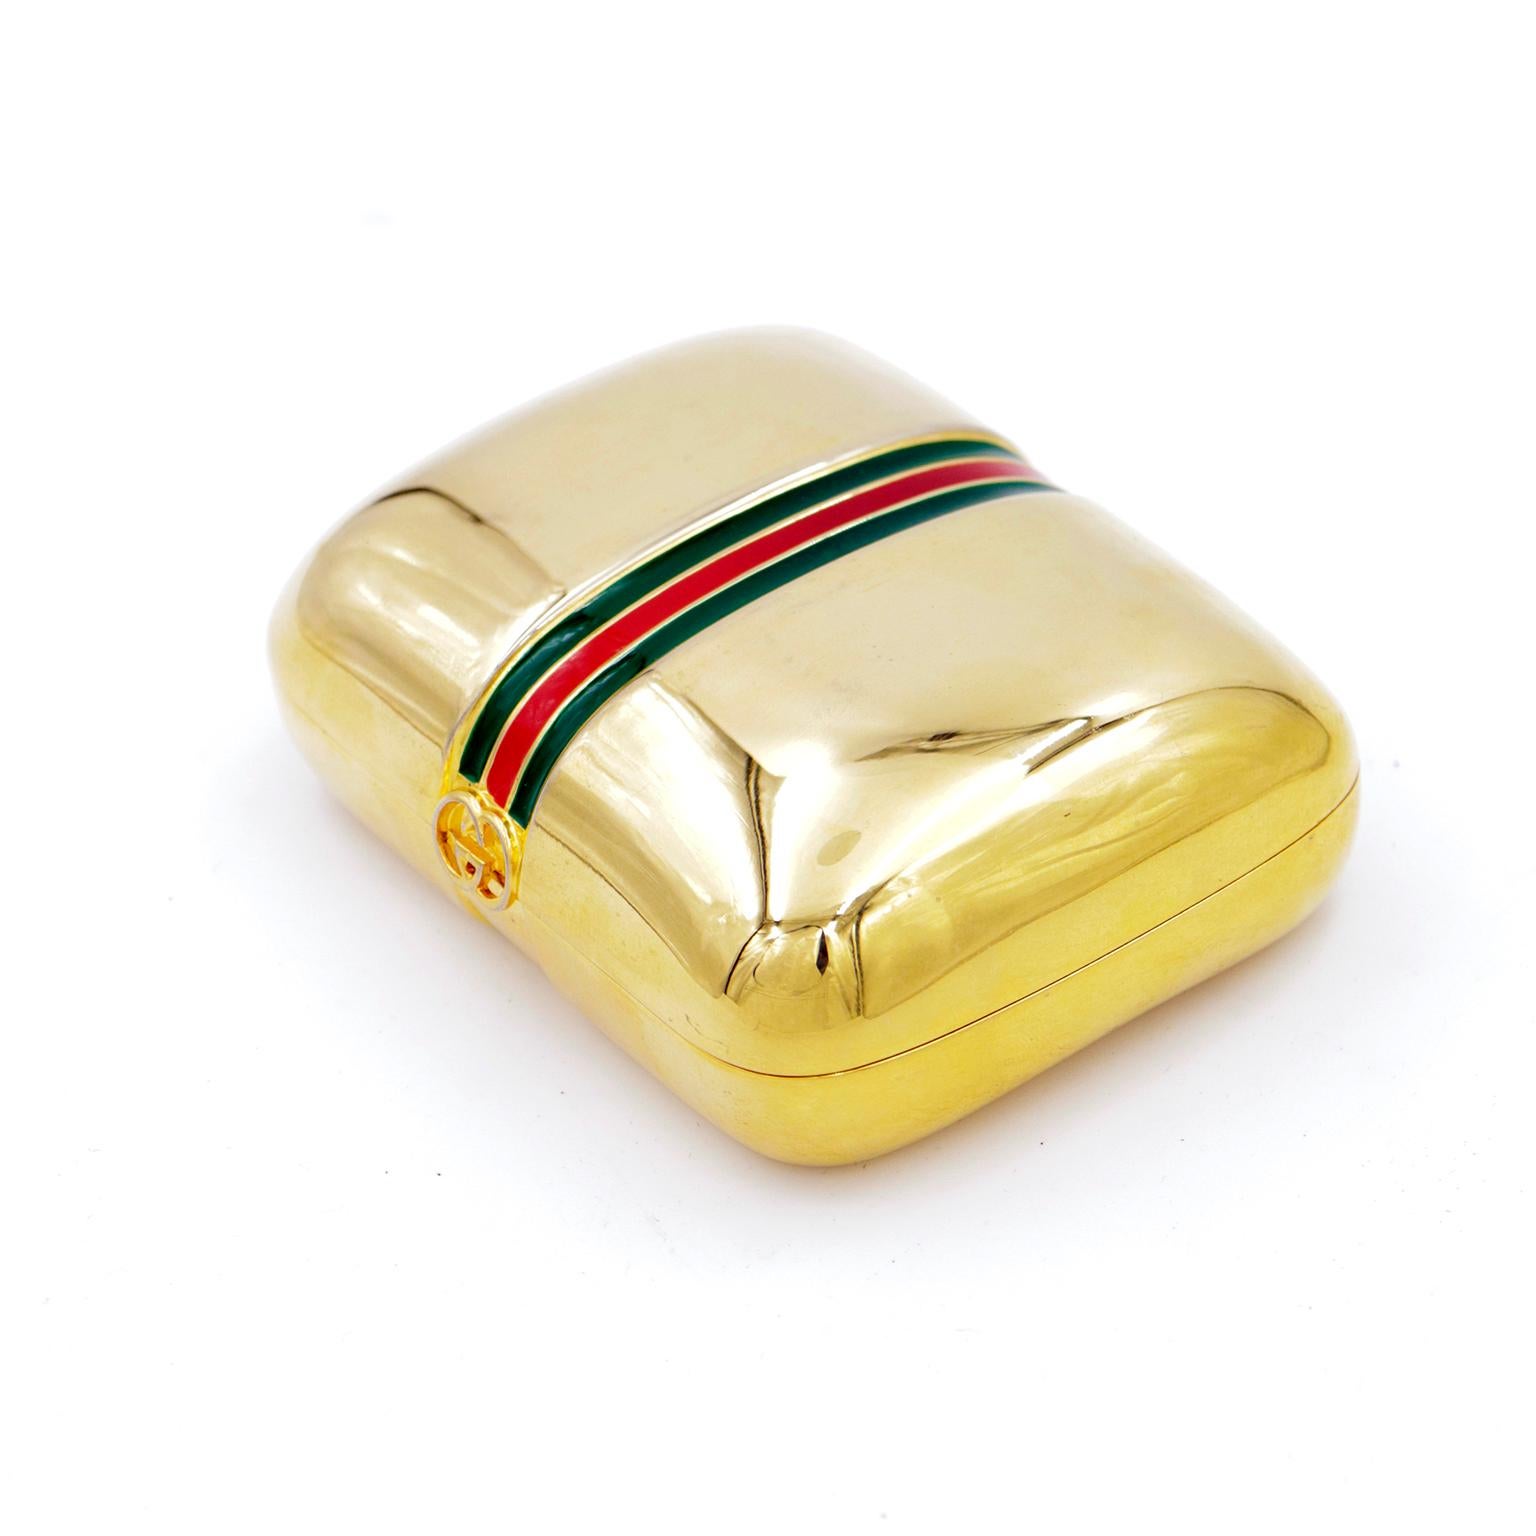 This pretty vintage 1980s gold plated Gucci trinket box has the signature Gucci red and green stripe down the center. This great case can be used to carry cards, medications,  jewelry, or even as a very small evening clutch if you don't mind leaving